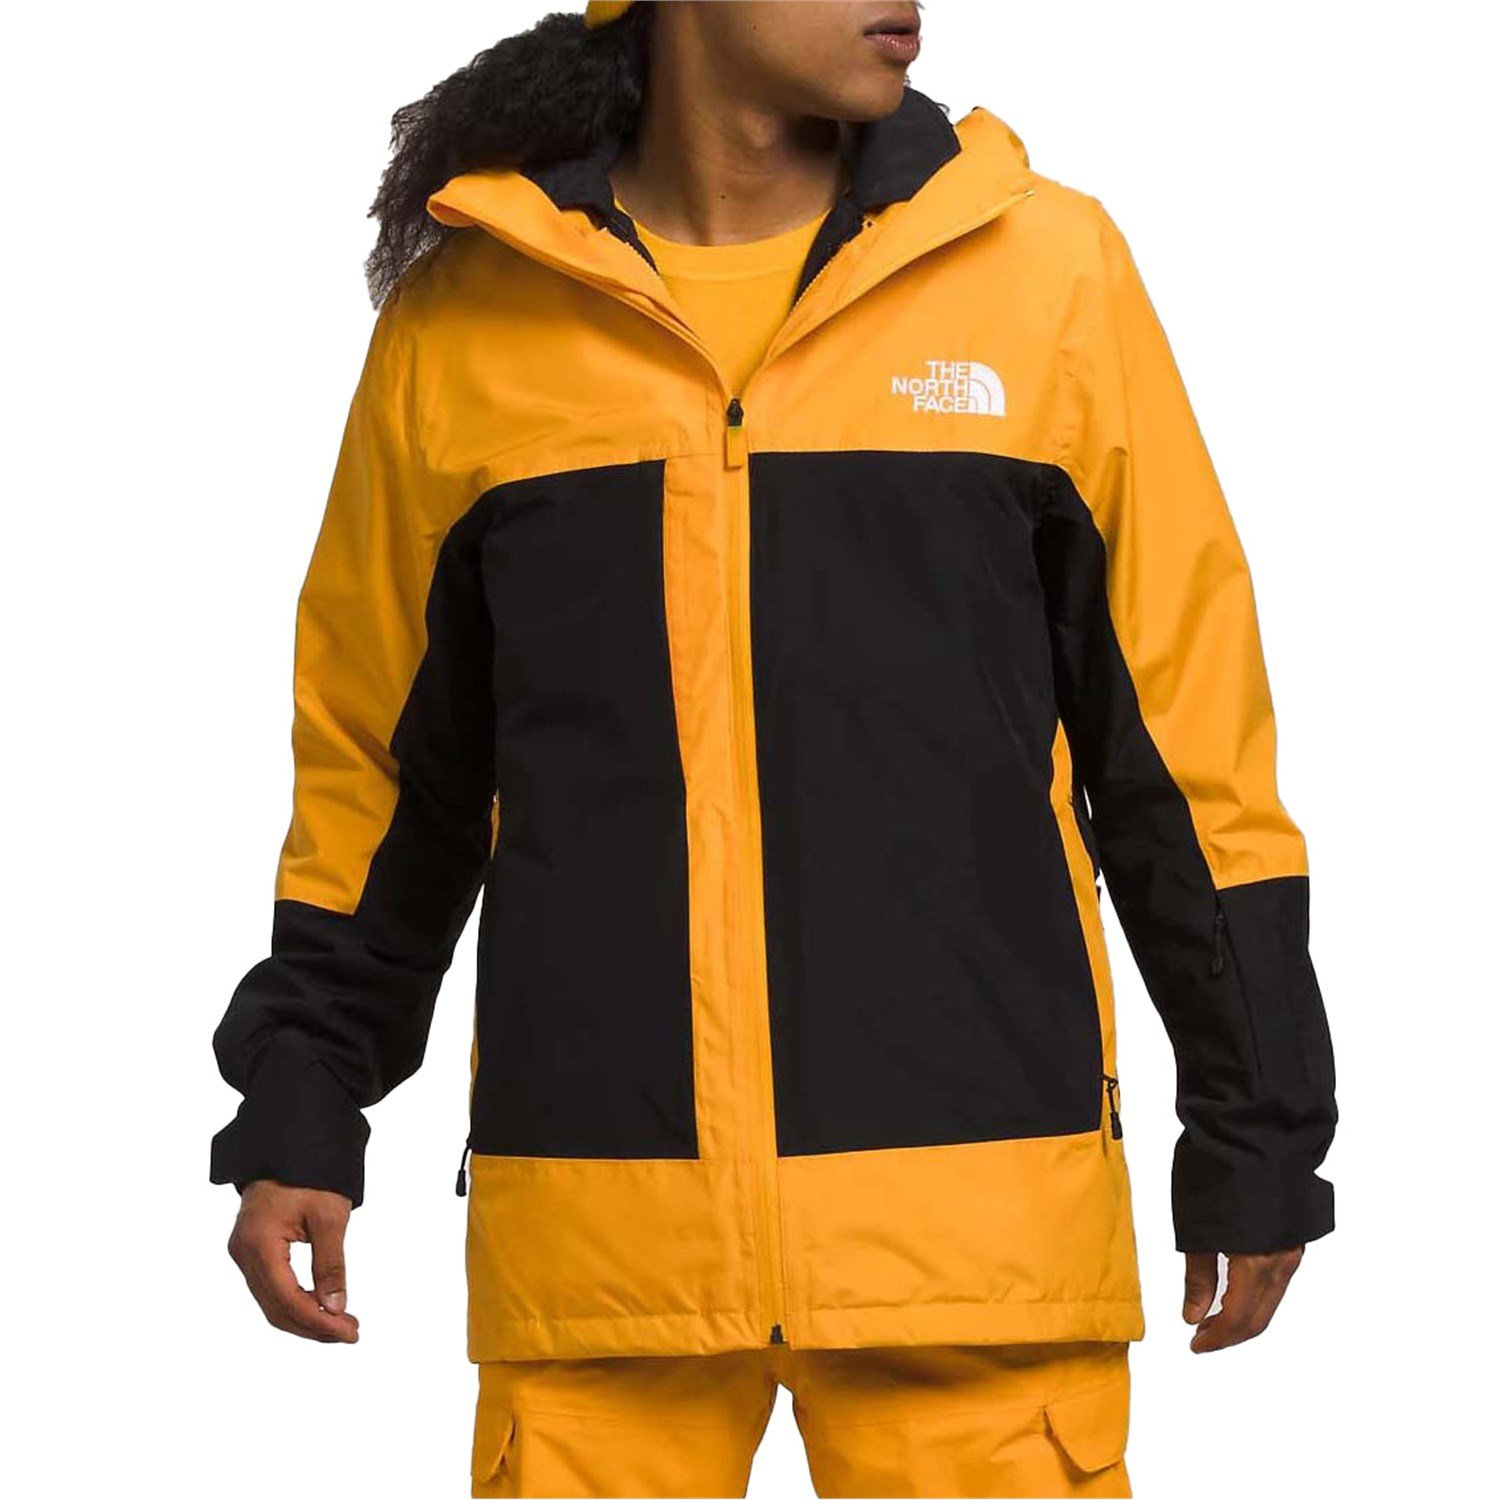 Куртка The North Face ThermoBall Eco Snow Triclimate, цвет Summit Gold куртка thermoball eco snow triclimate мужская the north face черный